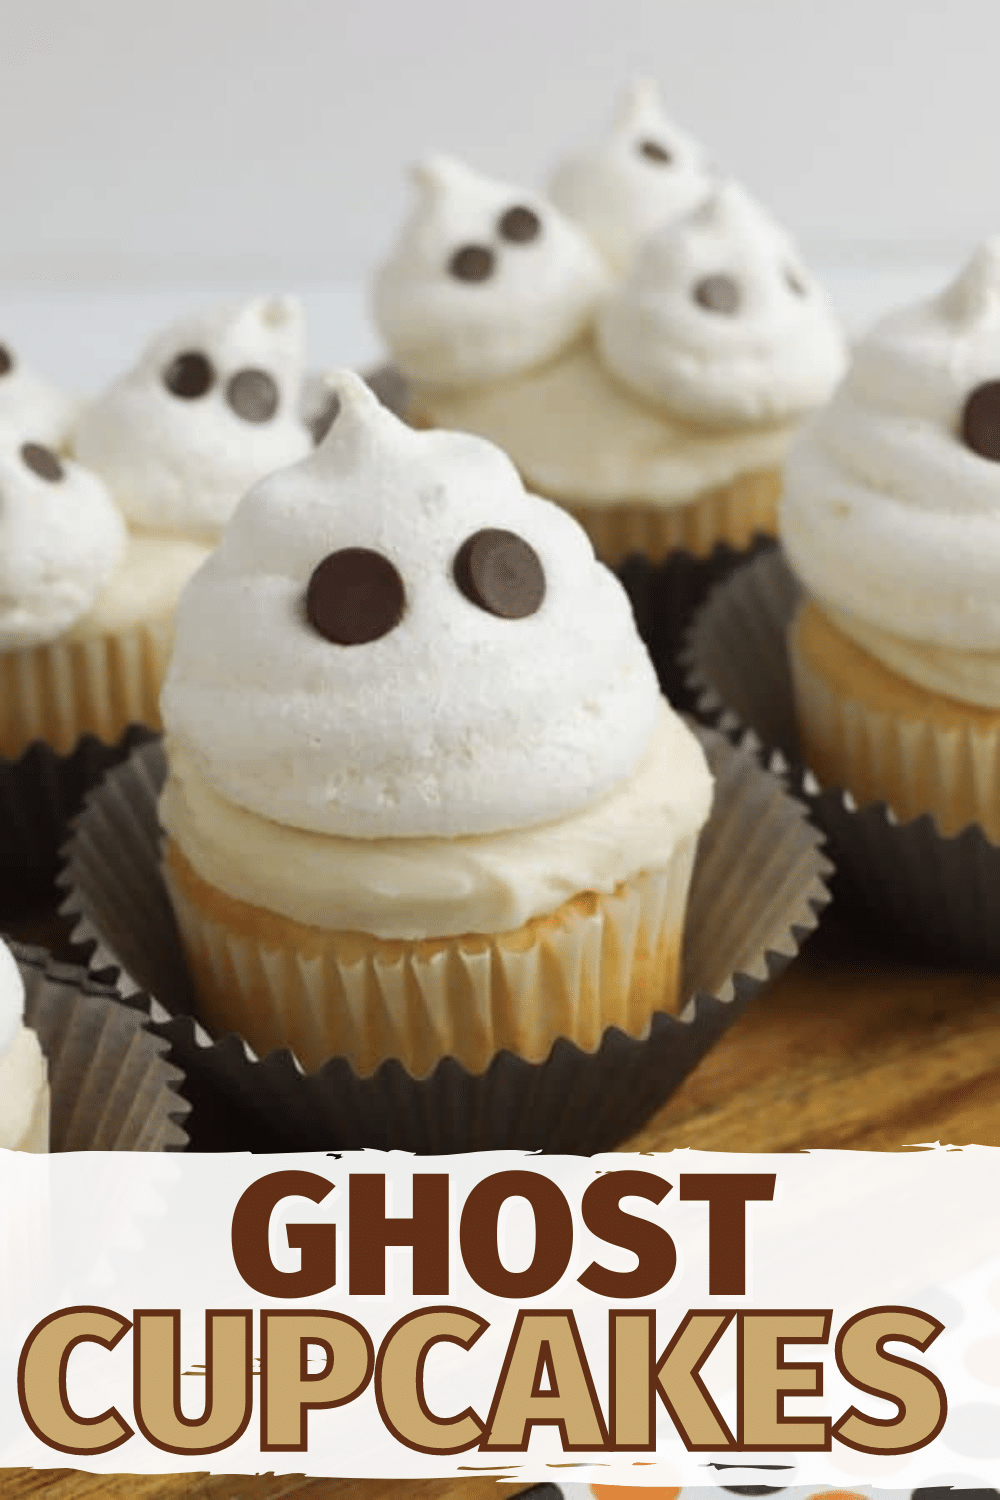 These adorable ghost cupcakes are the perfect treat for Halloween! Made with light as air meringue ghosts, these treats will disappear before your eyes. #ghostcupcakes #cupcakerecipe #halloween via @wondermomwannab